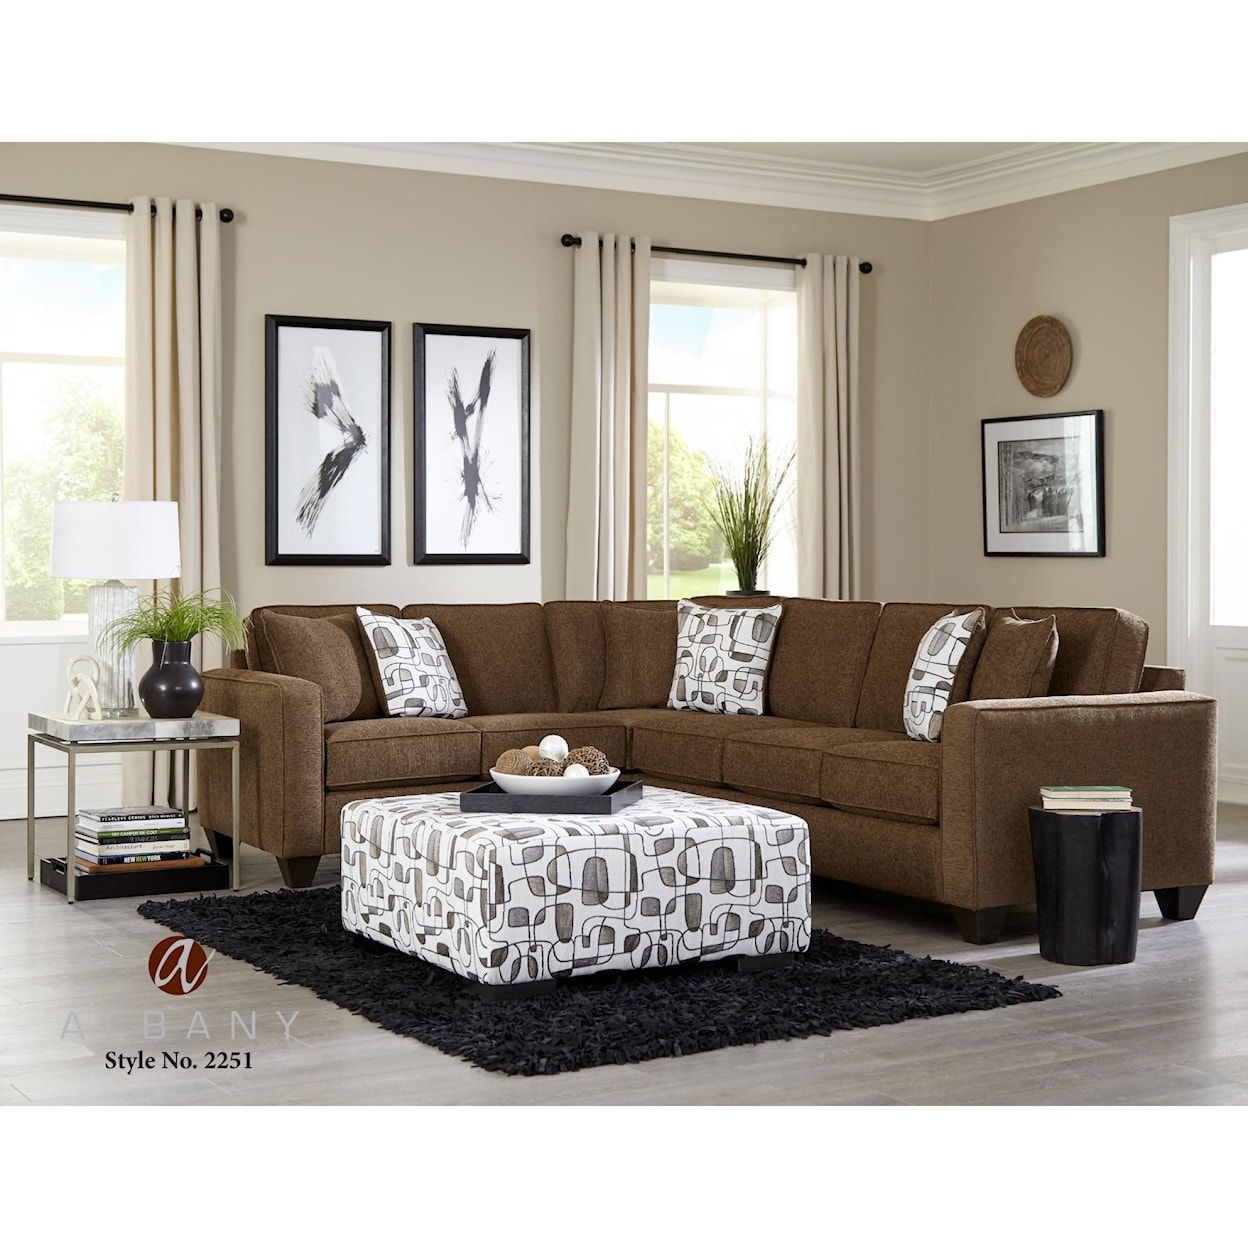 Albany 2251 2 PC Sectional Sofa